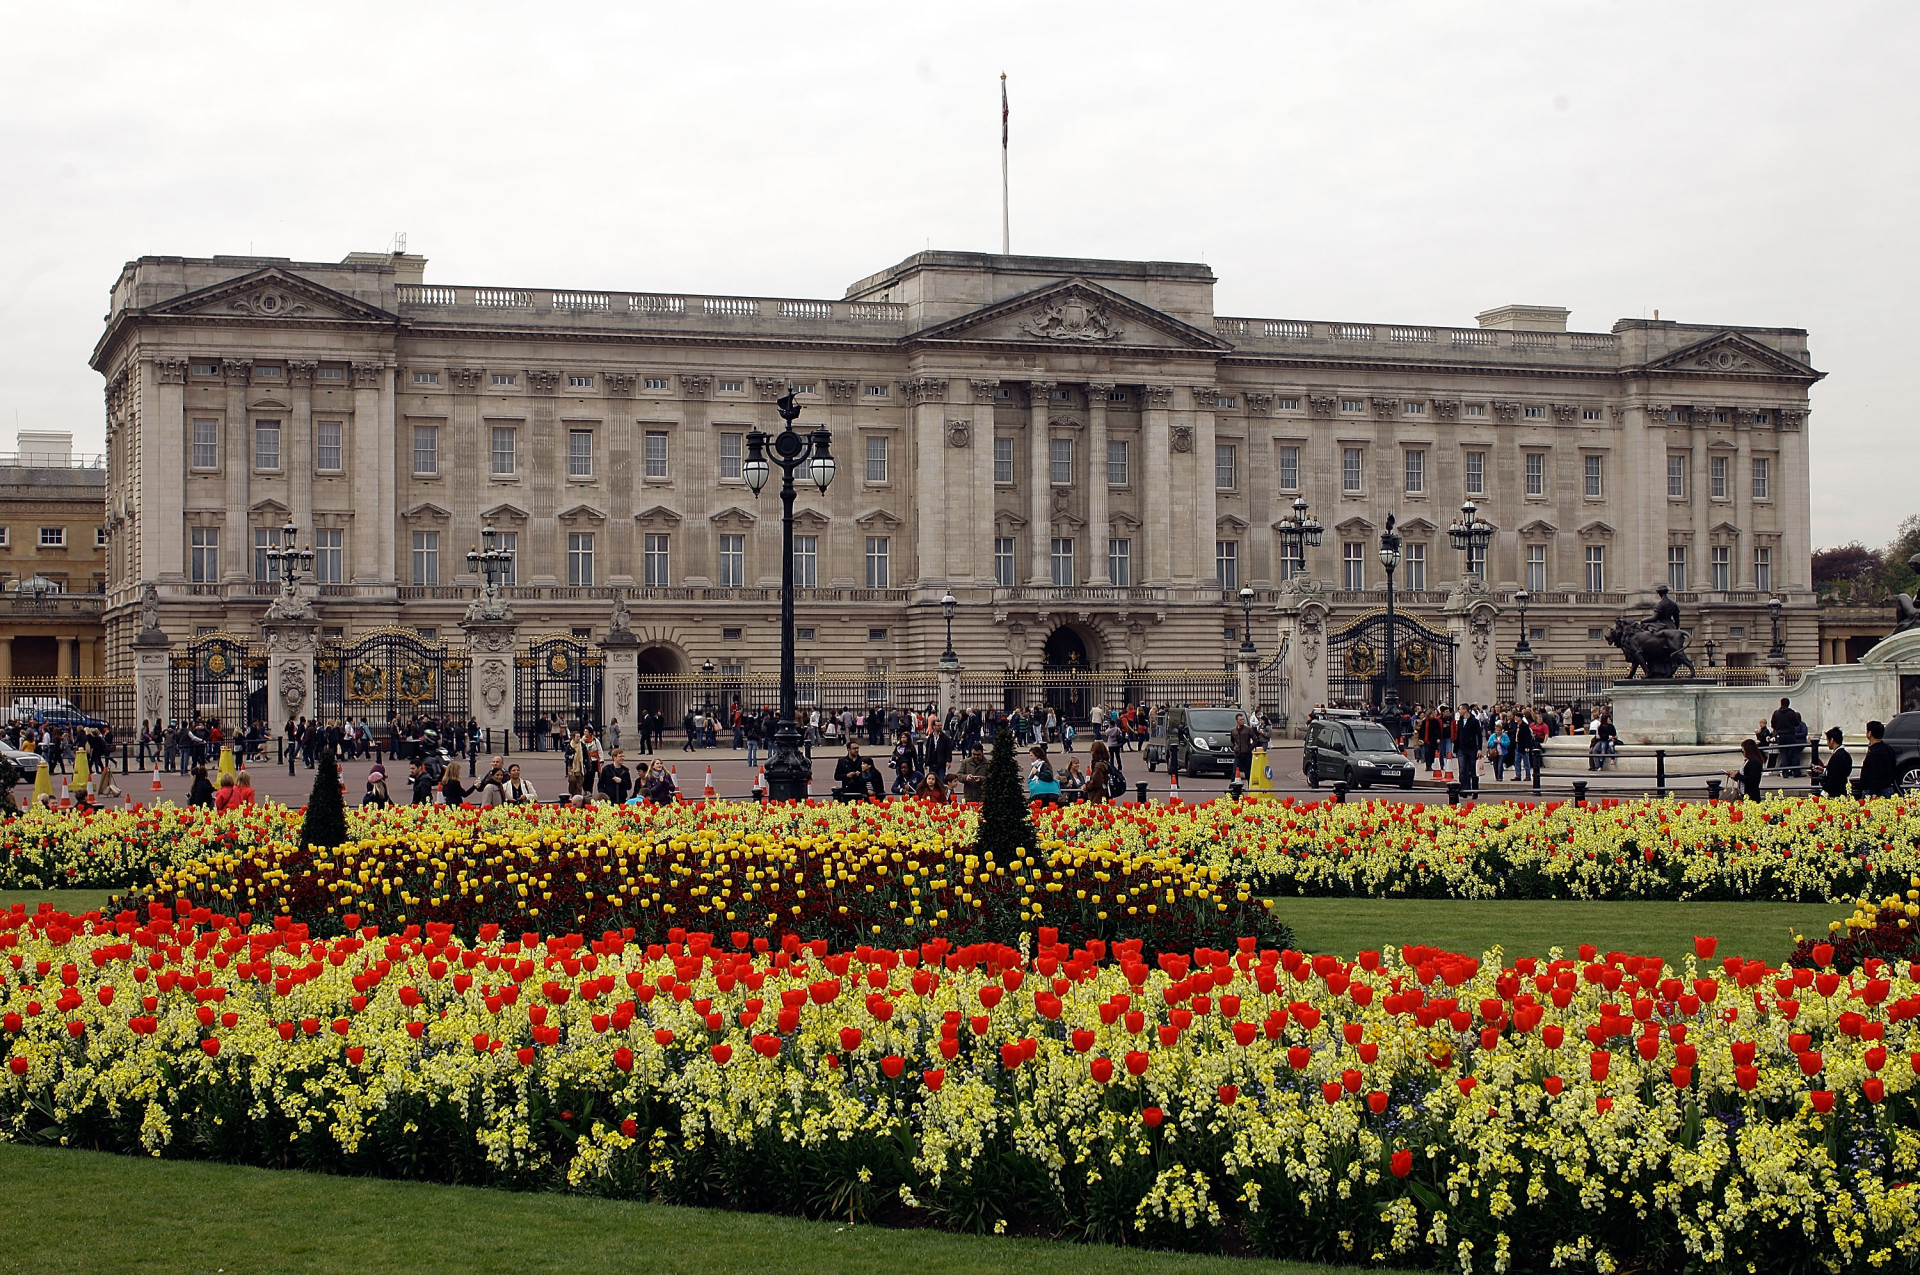 Spring flowers bloom outside the front gates of Buckingham Palace.<p><a href="https://www.msn.com/en-us/community/channel/vid-7xx8mnucu55yw63we9va2gwr7uihbxwc68fxqp25x6tg4ftibpra?cvid=94631541bc0f4f89bfd59158d696ad7e">Follow us and access great exclusive content every day</a></p>